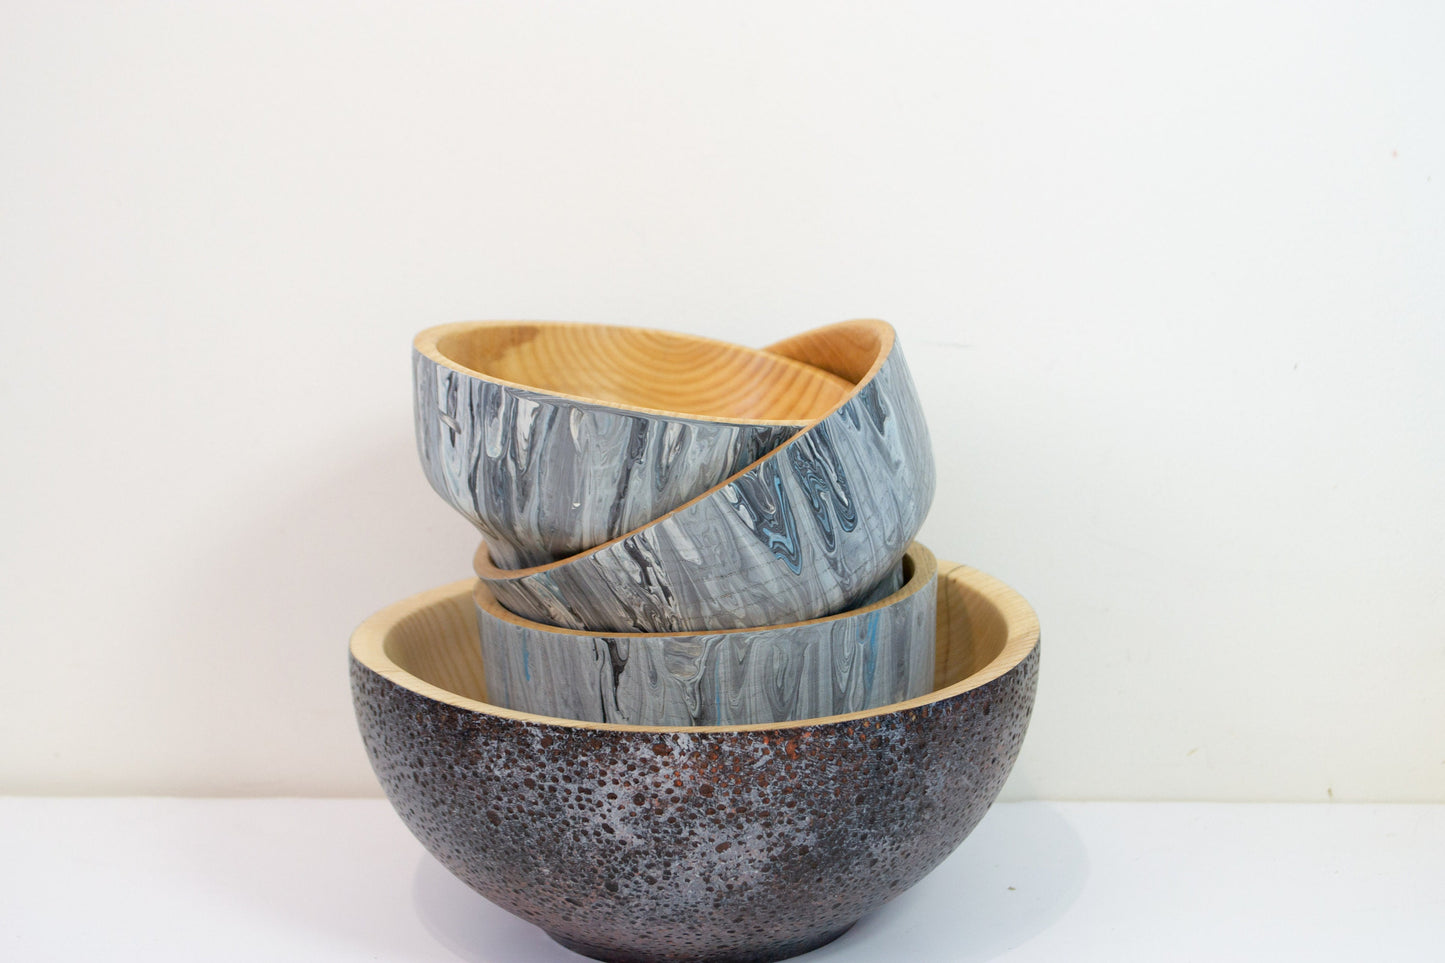 Hand turned ash wood bowl - Artistic Painted turned wood bowl